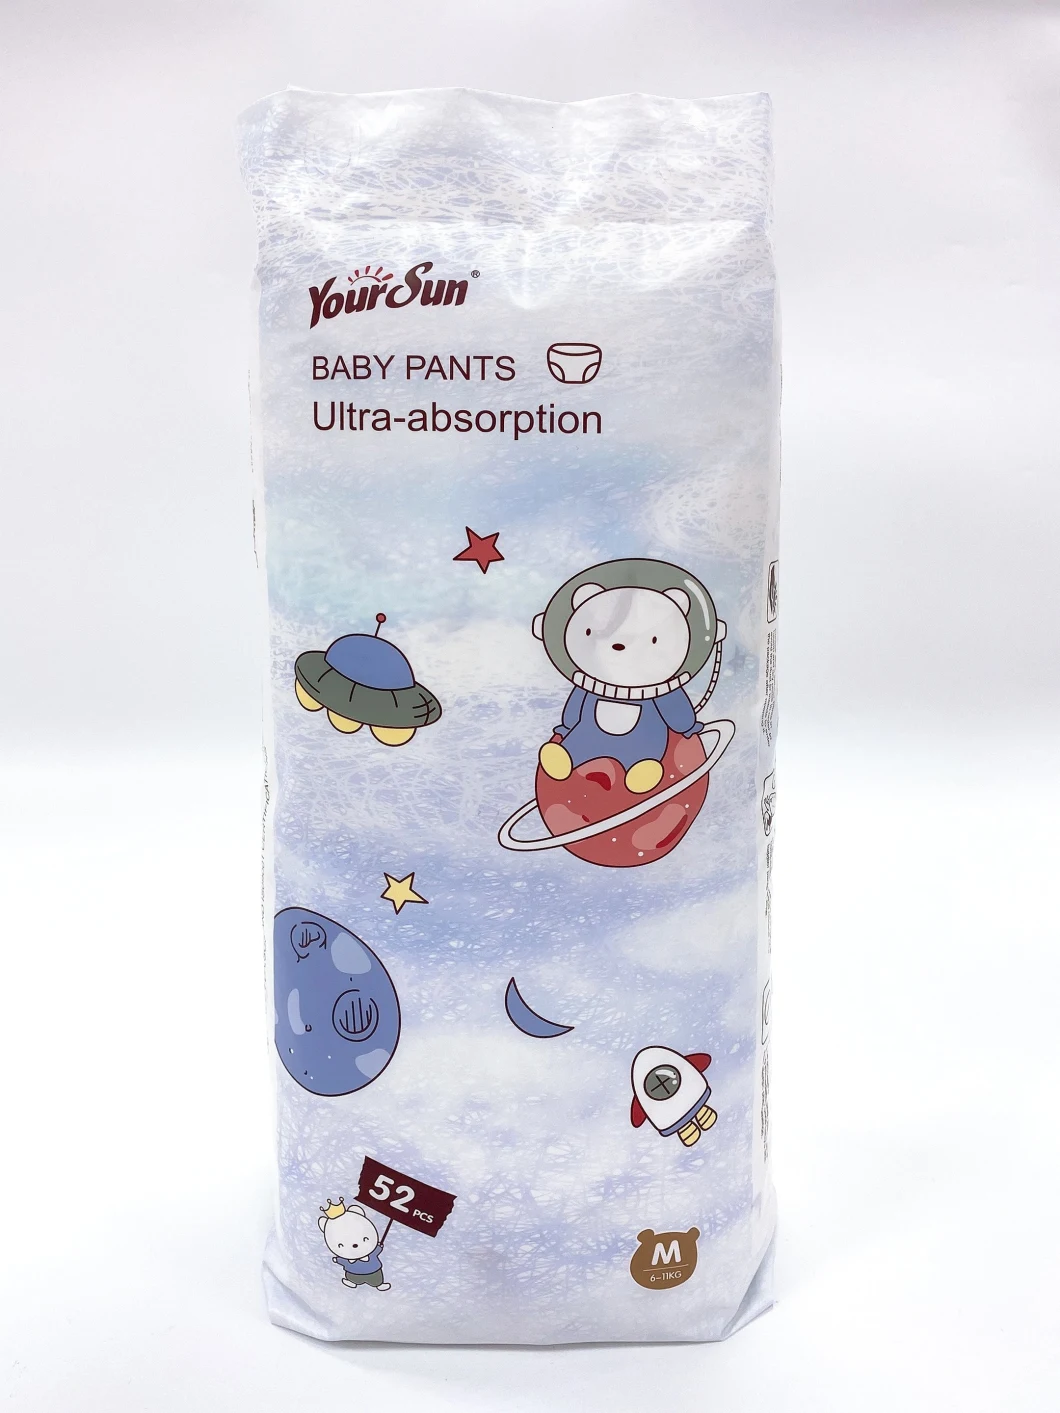 Top Selling Super Soft Yoursun Disposable Baby Pants Diapers